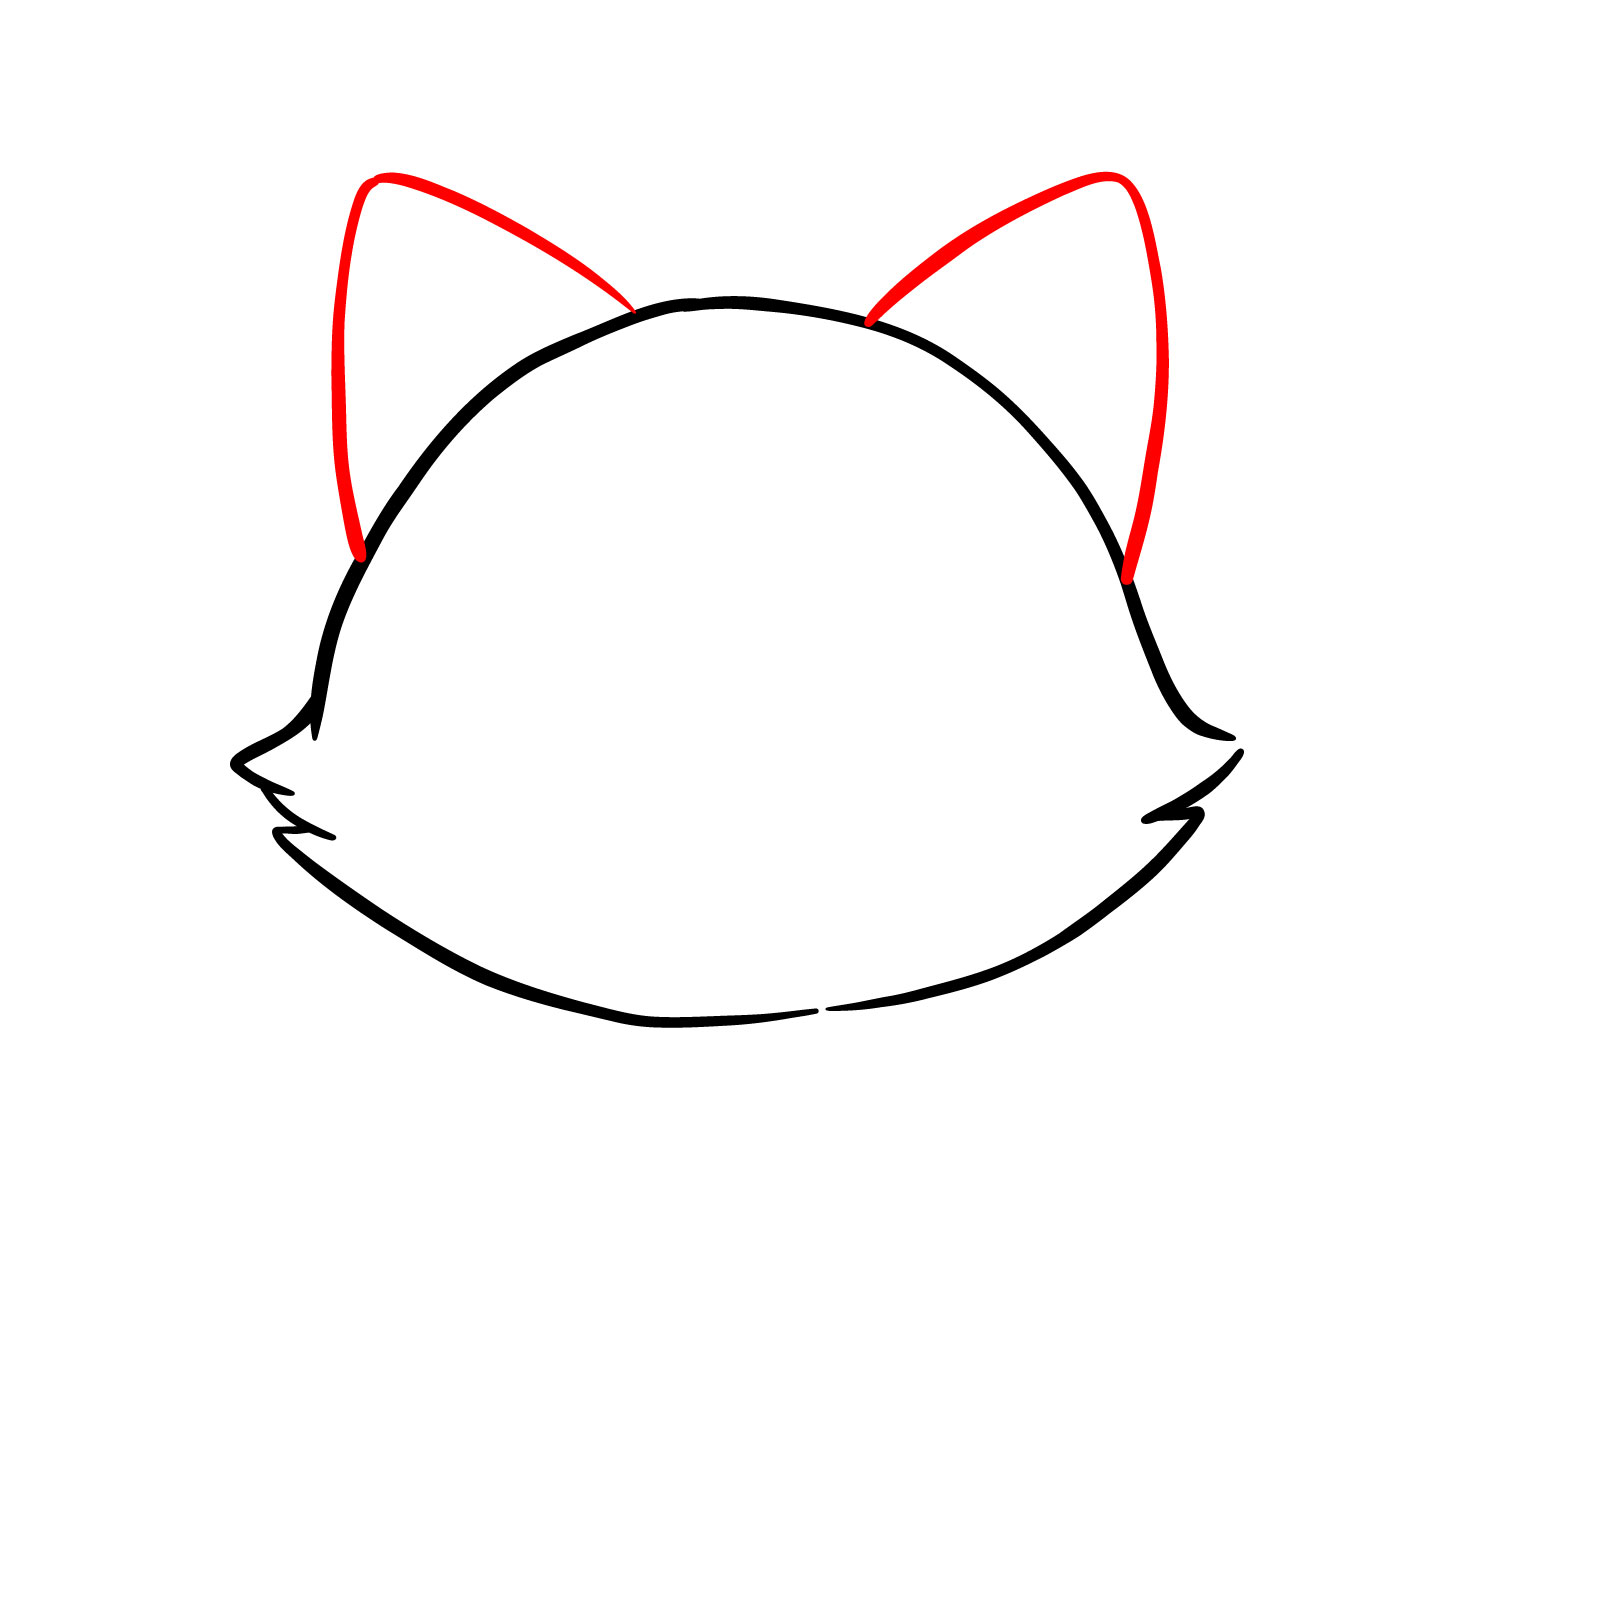 Triangular shapes for kitten ears added to the head - step 03